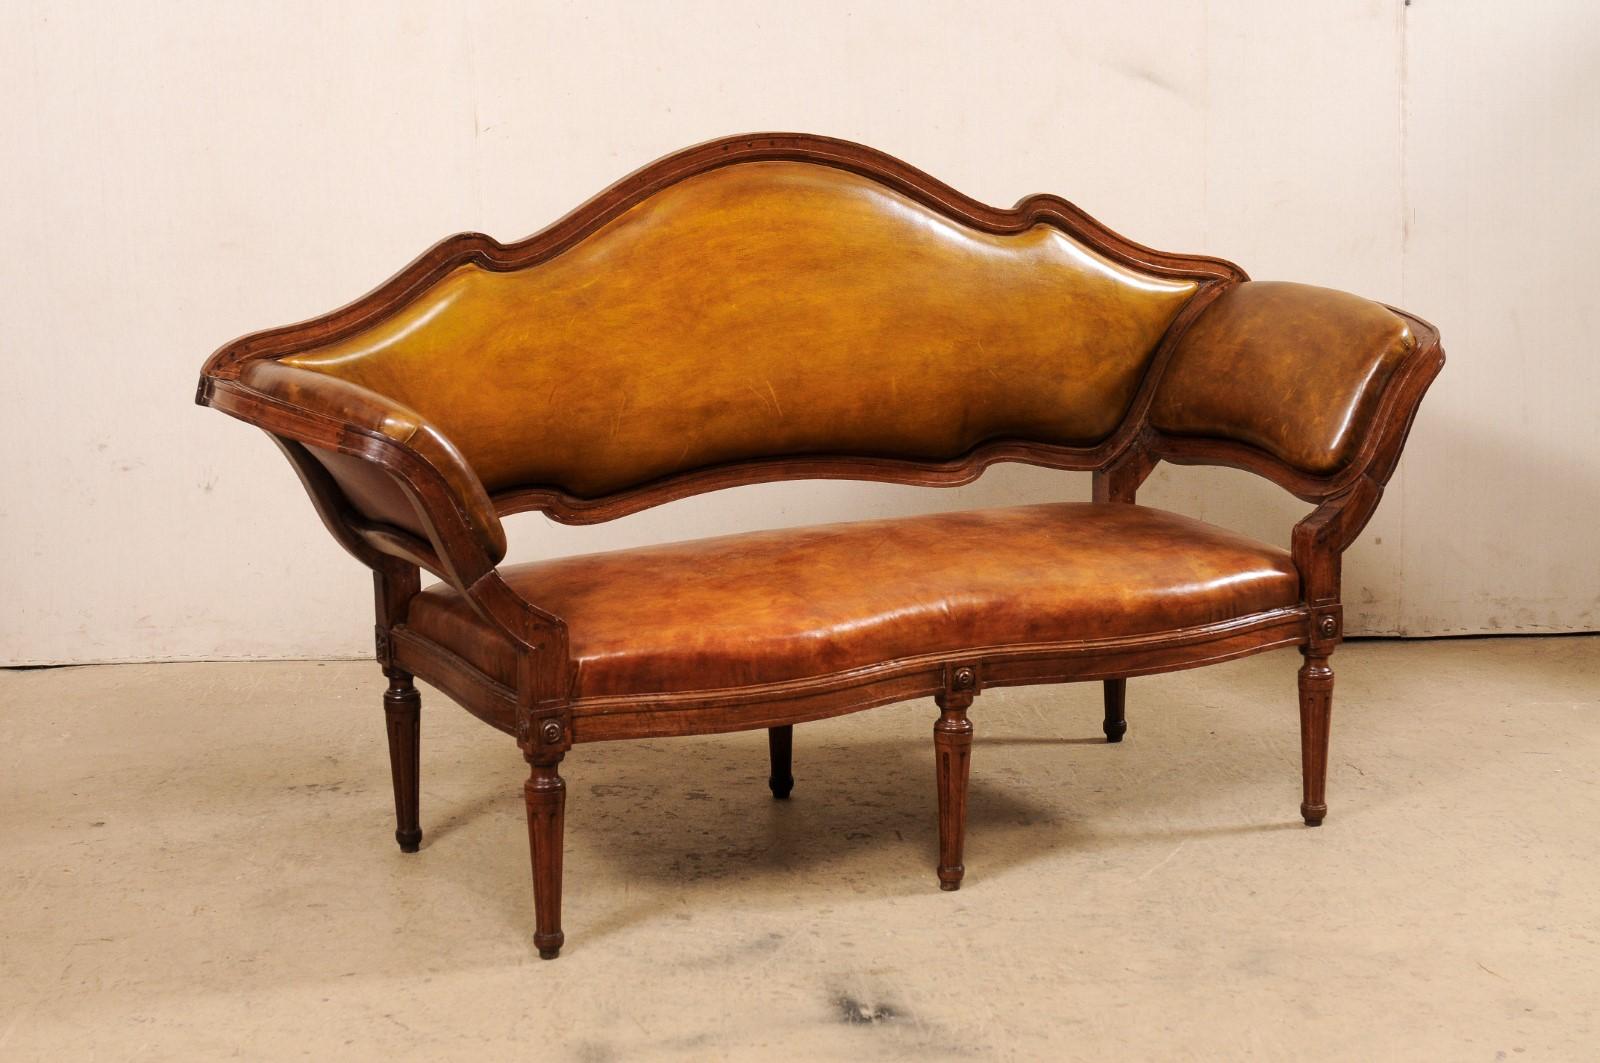 Italian Venetian Leather Upholstered & Carved Wood Settee Sofa, 19th Century For Sale 2